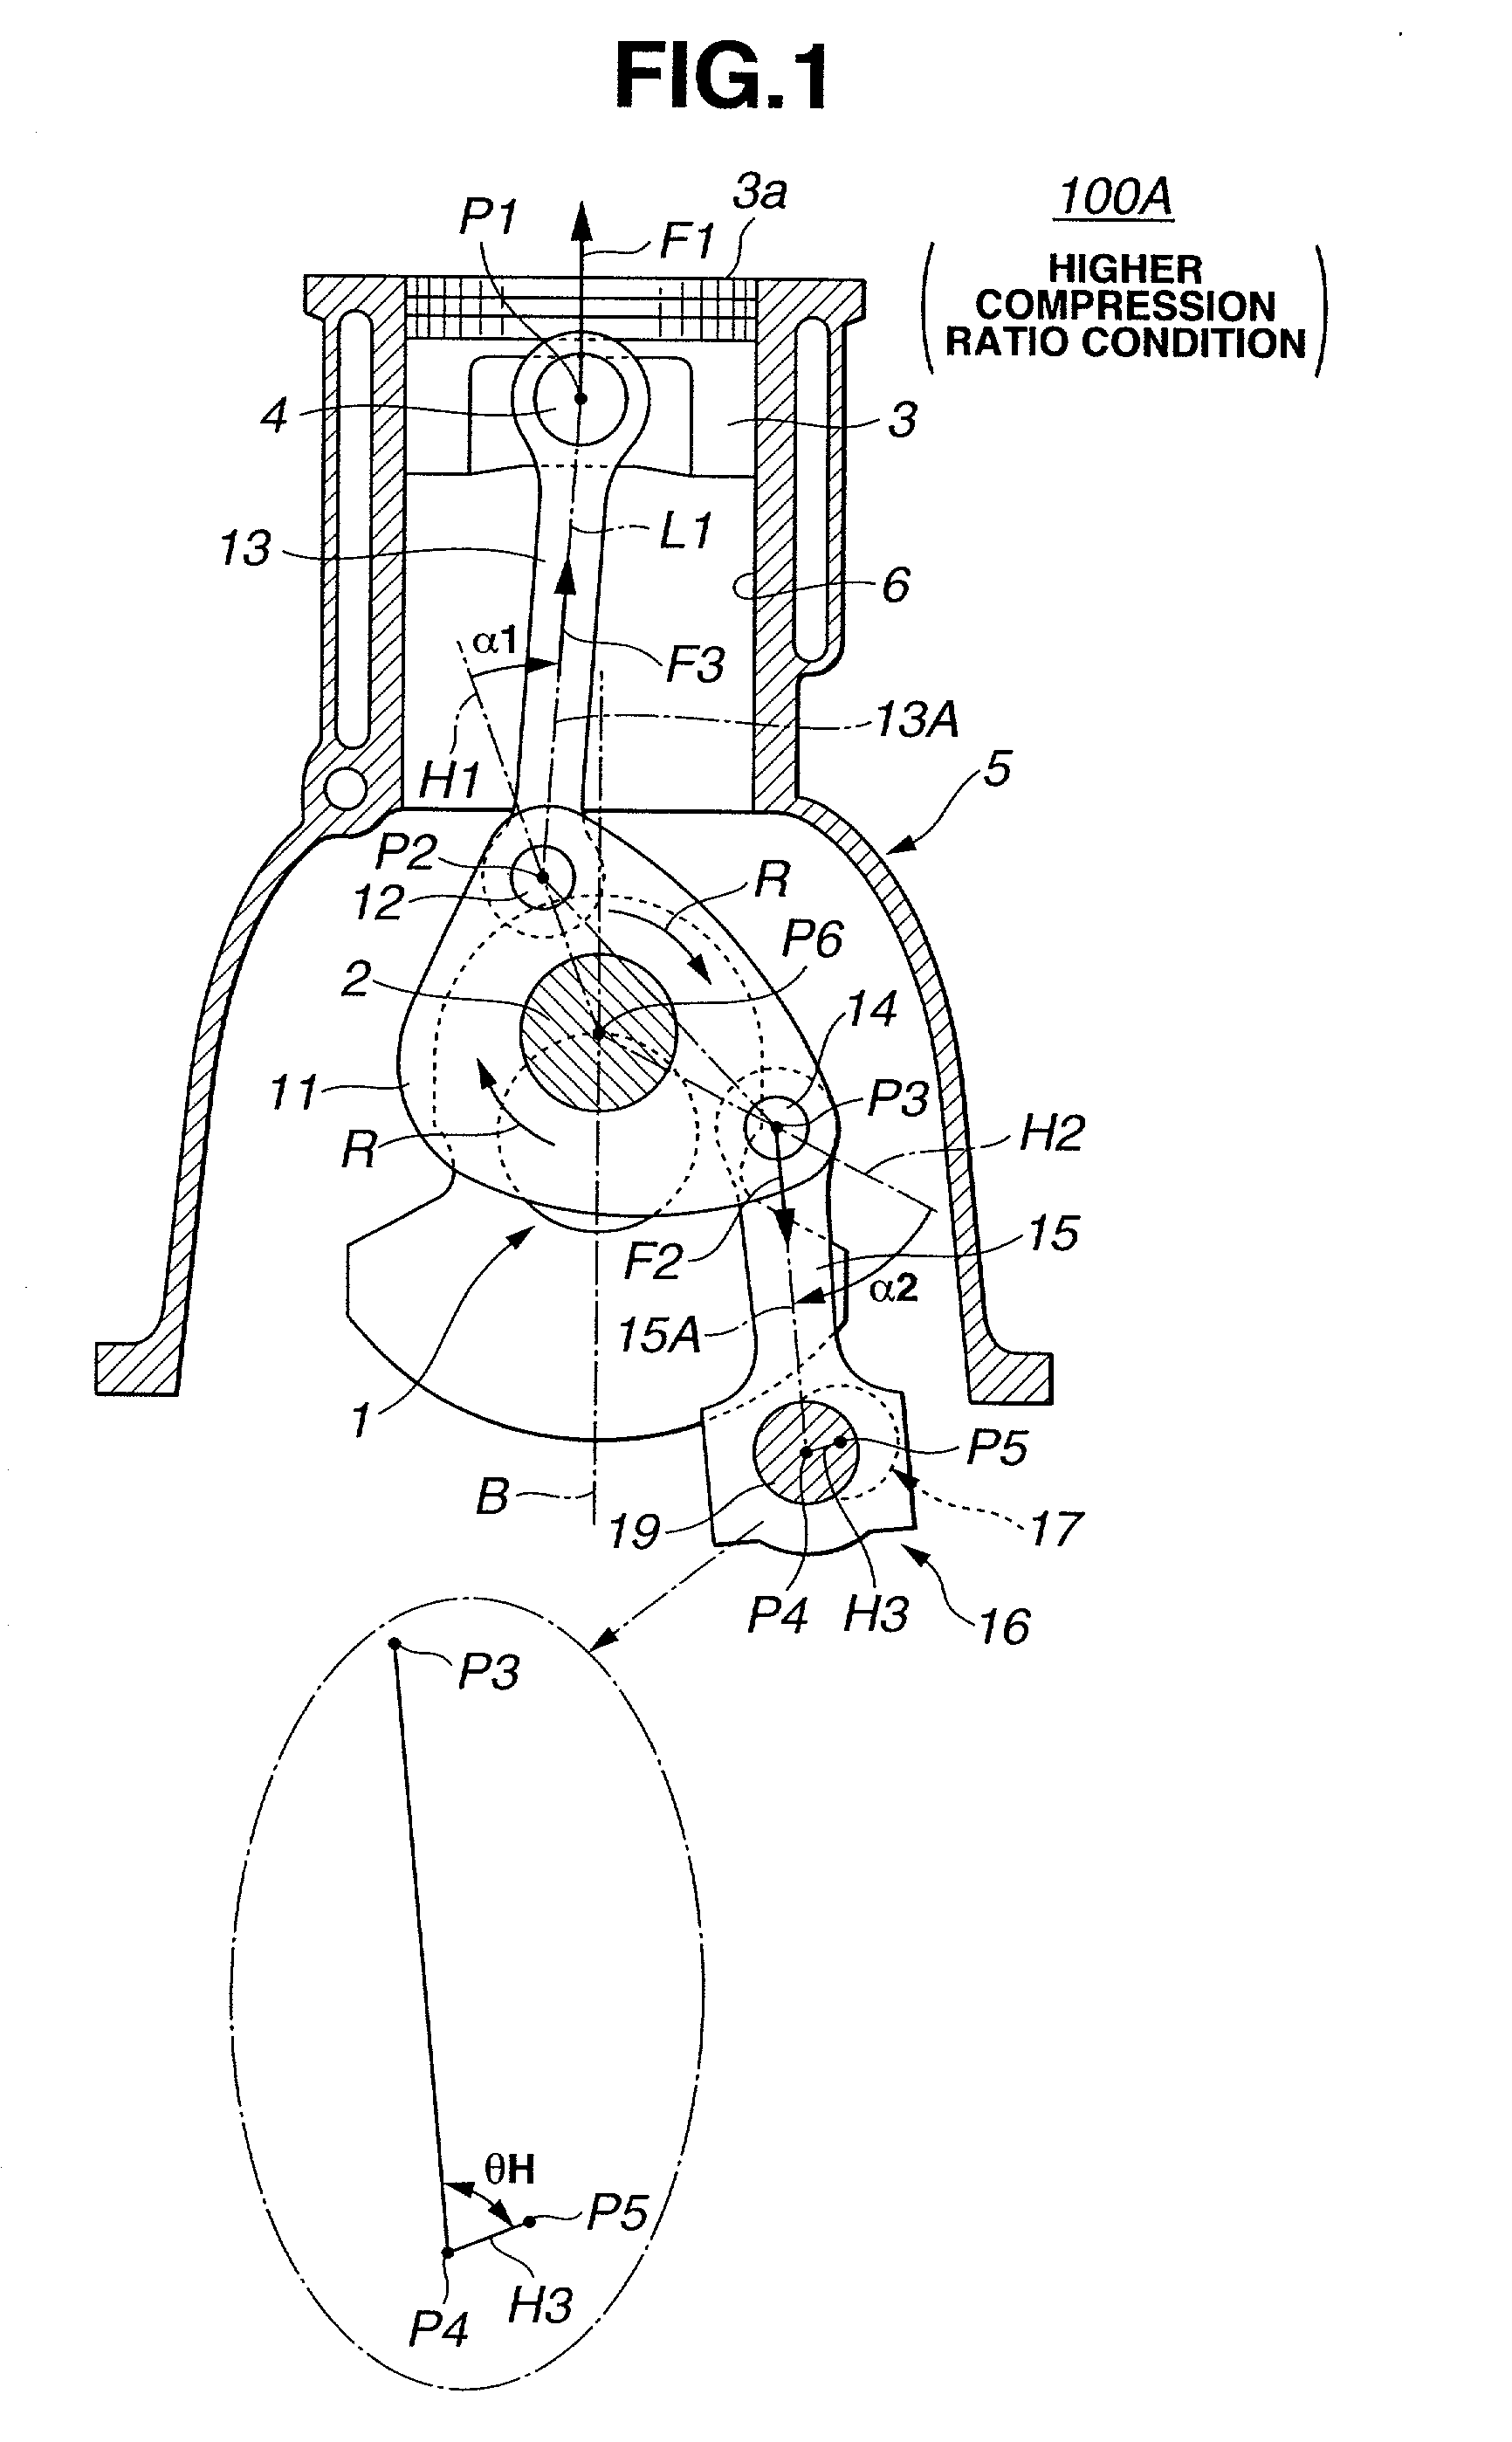 Piston control mechanism of reciprocating internal combustion engine of variable compression ratio type